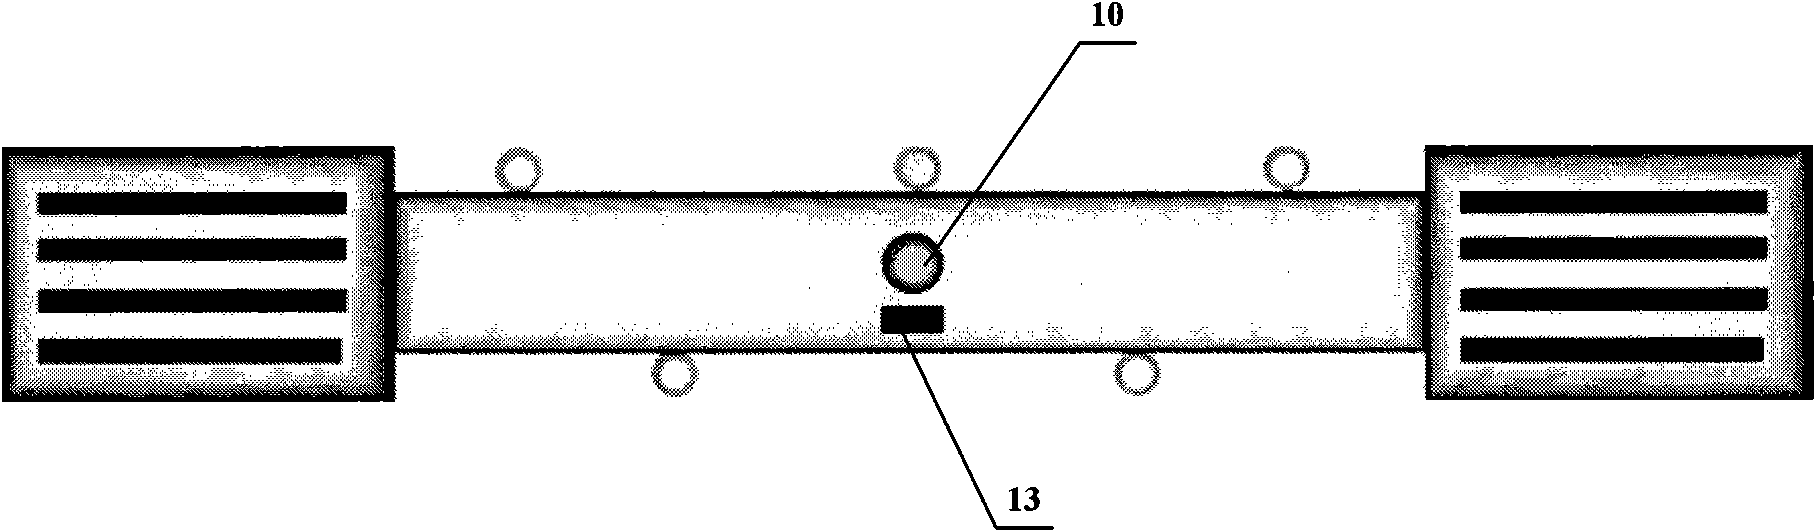 Intelligent vehicle safety vision detection device and motion target tracking method